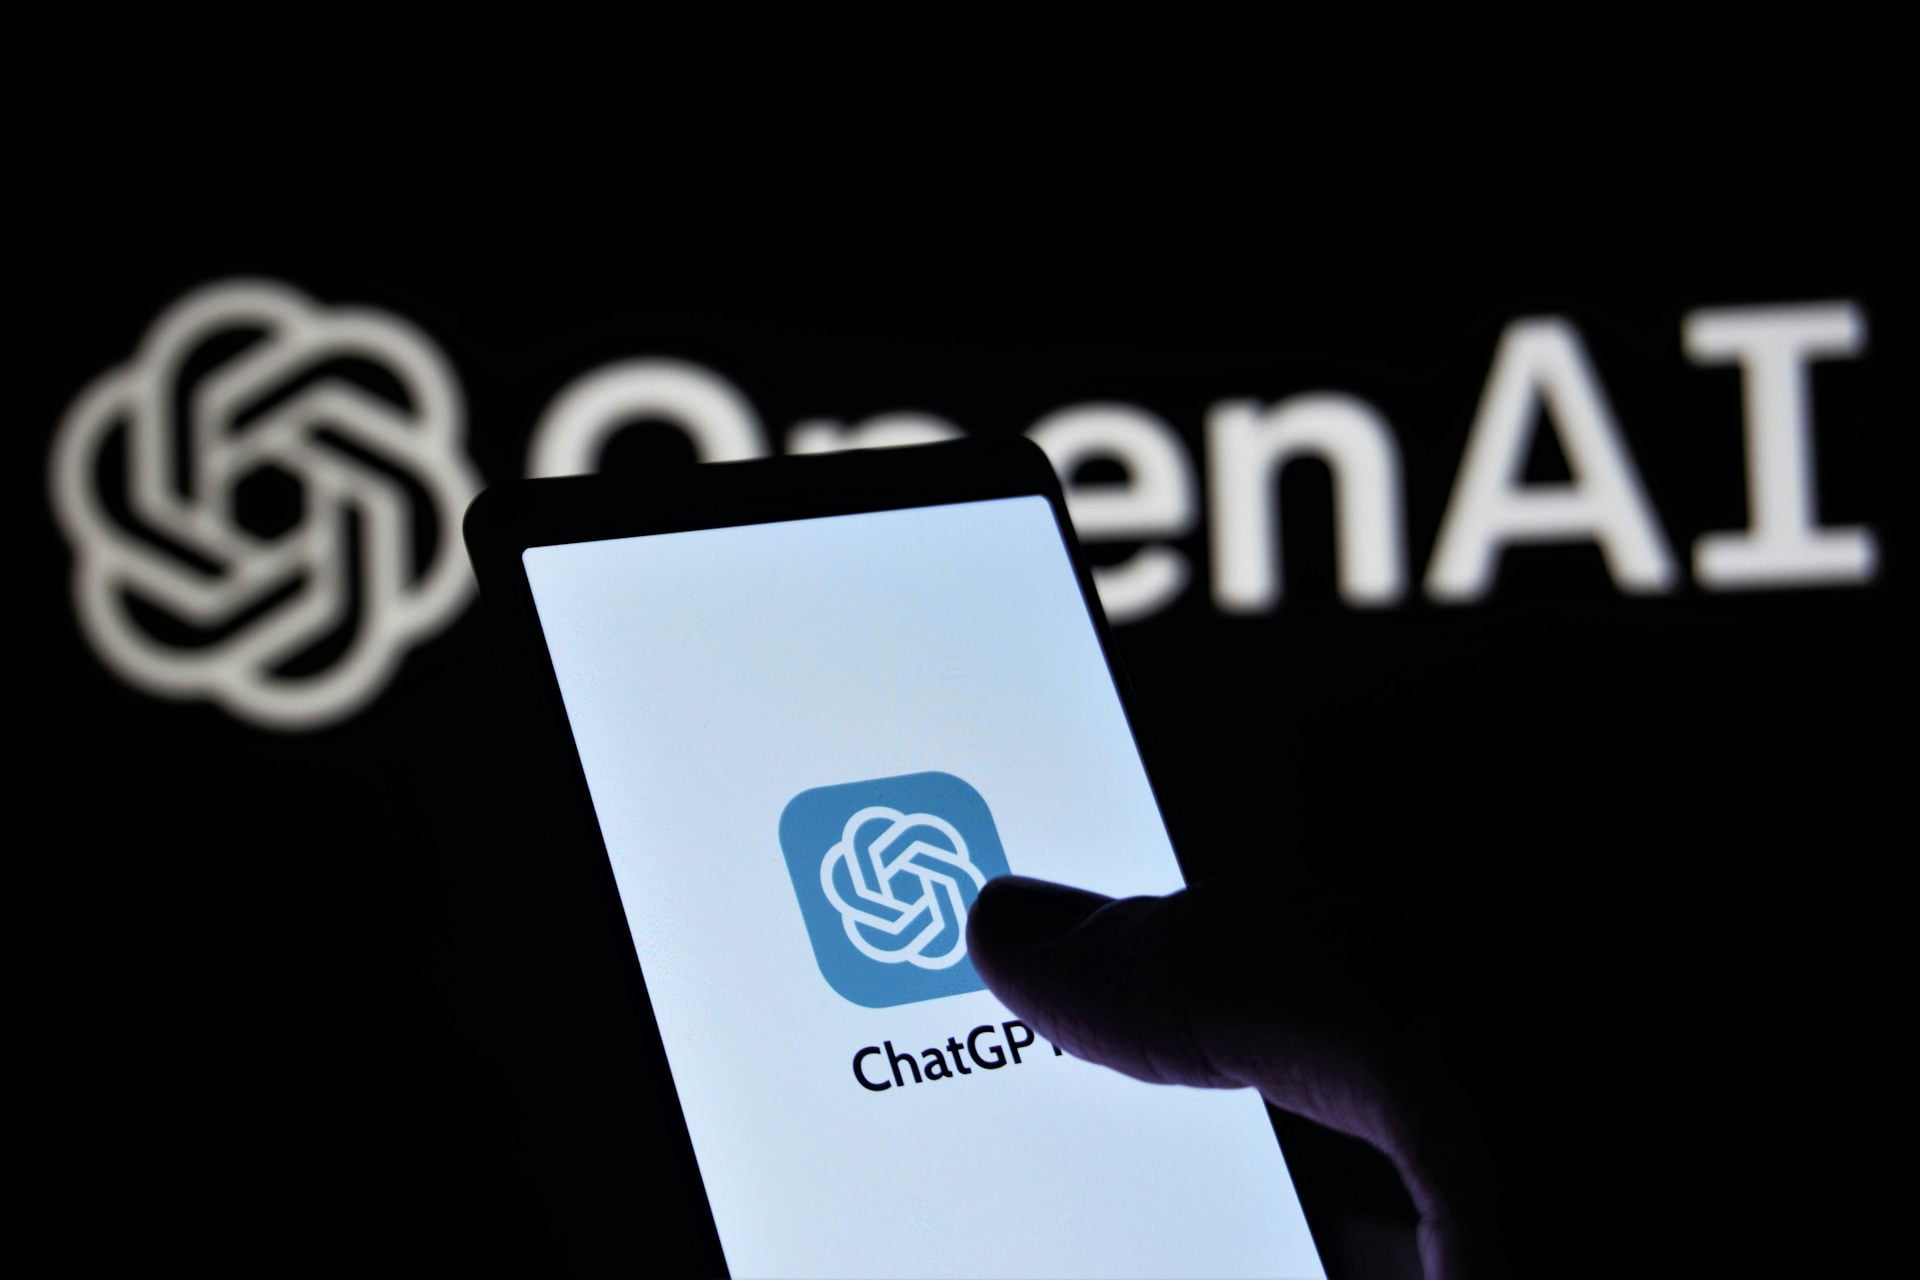 Person holding phone with ChatGPT logo displayed